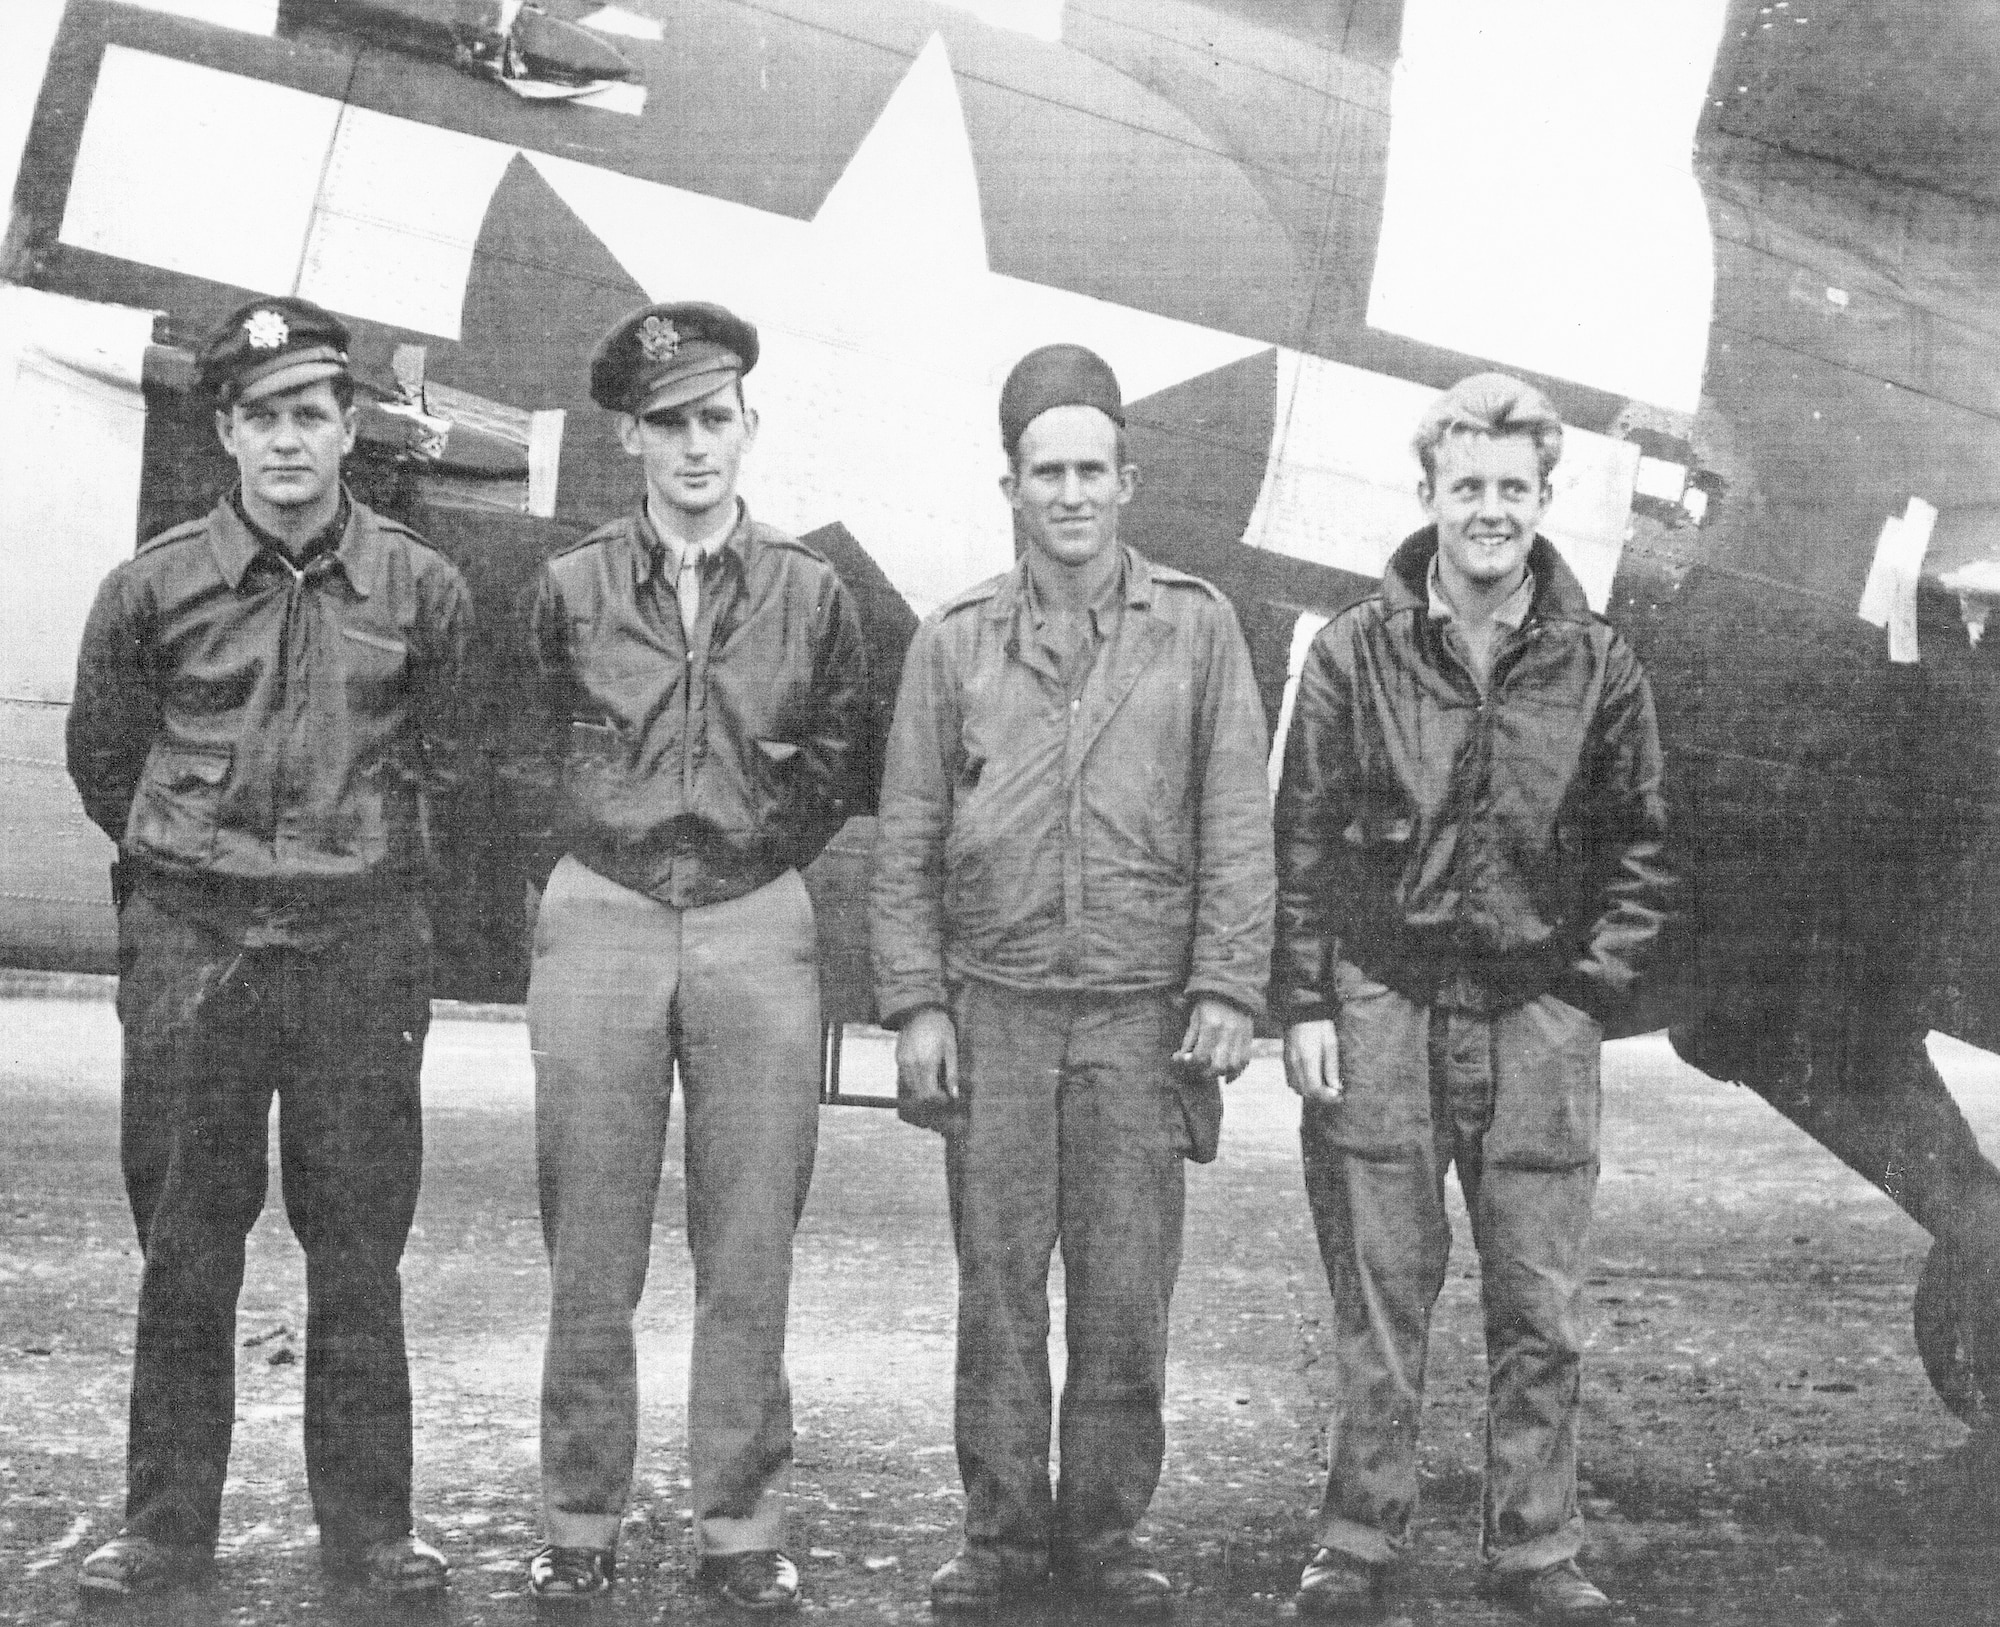 On ?D-Plus One," also known as the day after D-Day, four 305th Troop Carrier Squadron aircrew members pause between missions to pose for a photo in front of their C-47. From the left are Albert Maverick, III, Robert L. Tittle, Raymond E. Crocker and Gus King, Jr. The 305th TCS was one of four flying squadrons assigned to the 442nd Troop Carrier Group, the World War II predecessor of the 442nd Fighter Wing, an Air Force Reserve Command A-10 Thunderbolt II unit based at Whiteman Air Force Base, Mo. (Photo courtesy of the Herky Barbour estate)